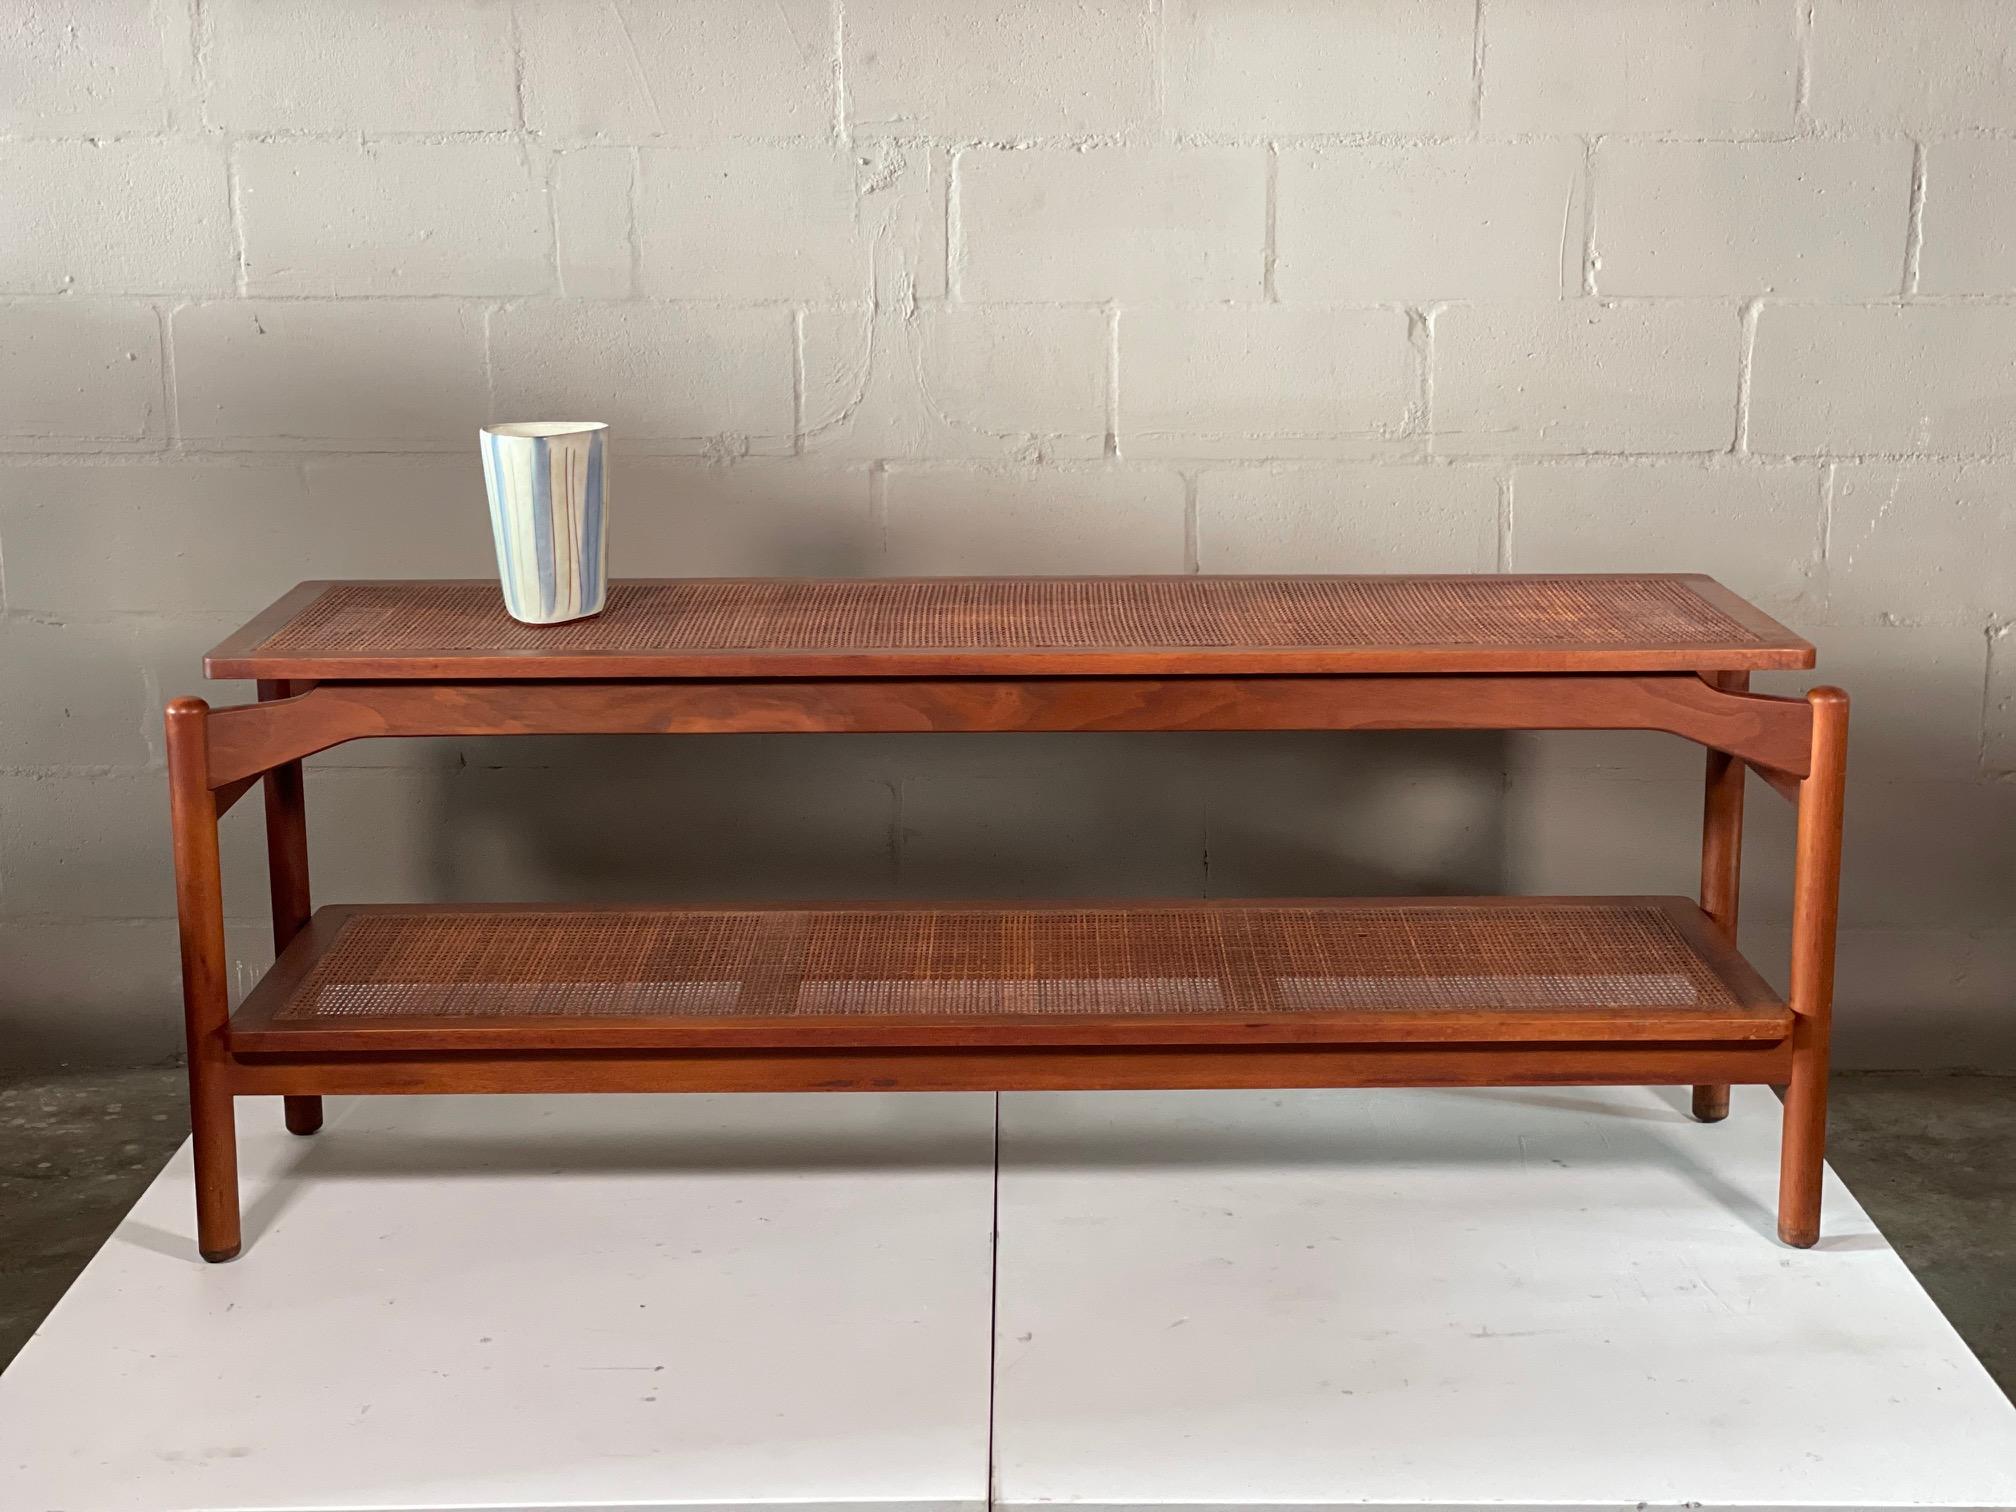 An unusual floating console table by Greta Grossman for Glenn of California. Caned top and bottom shelves.